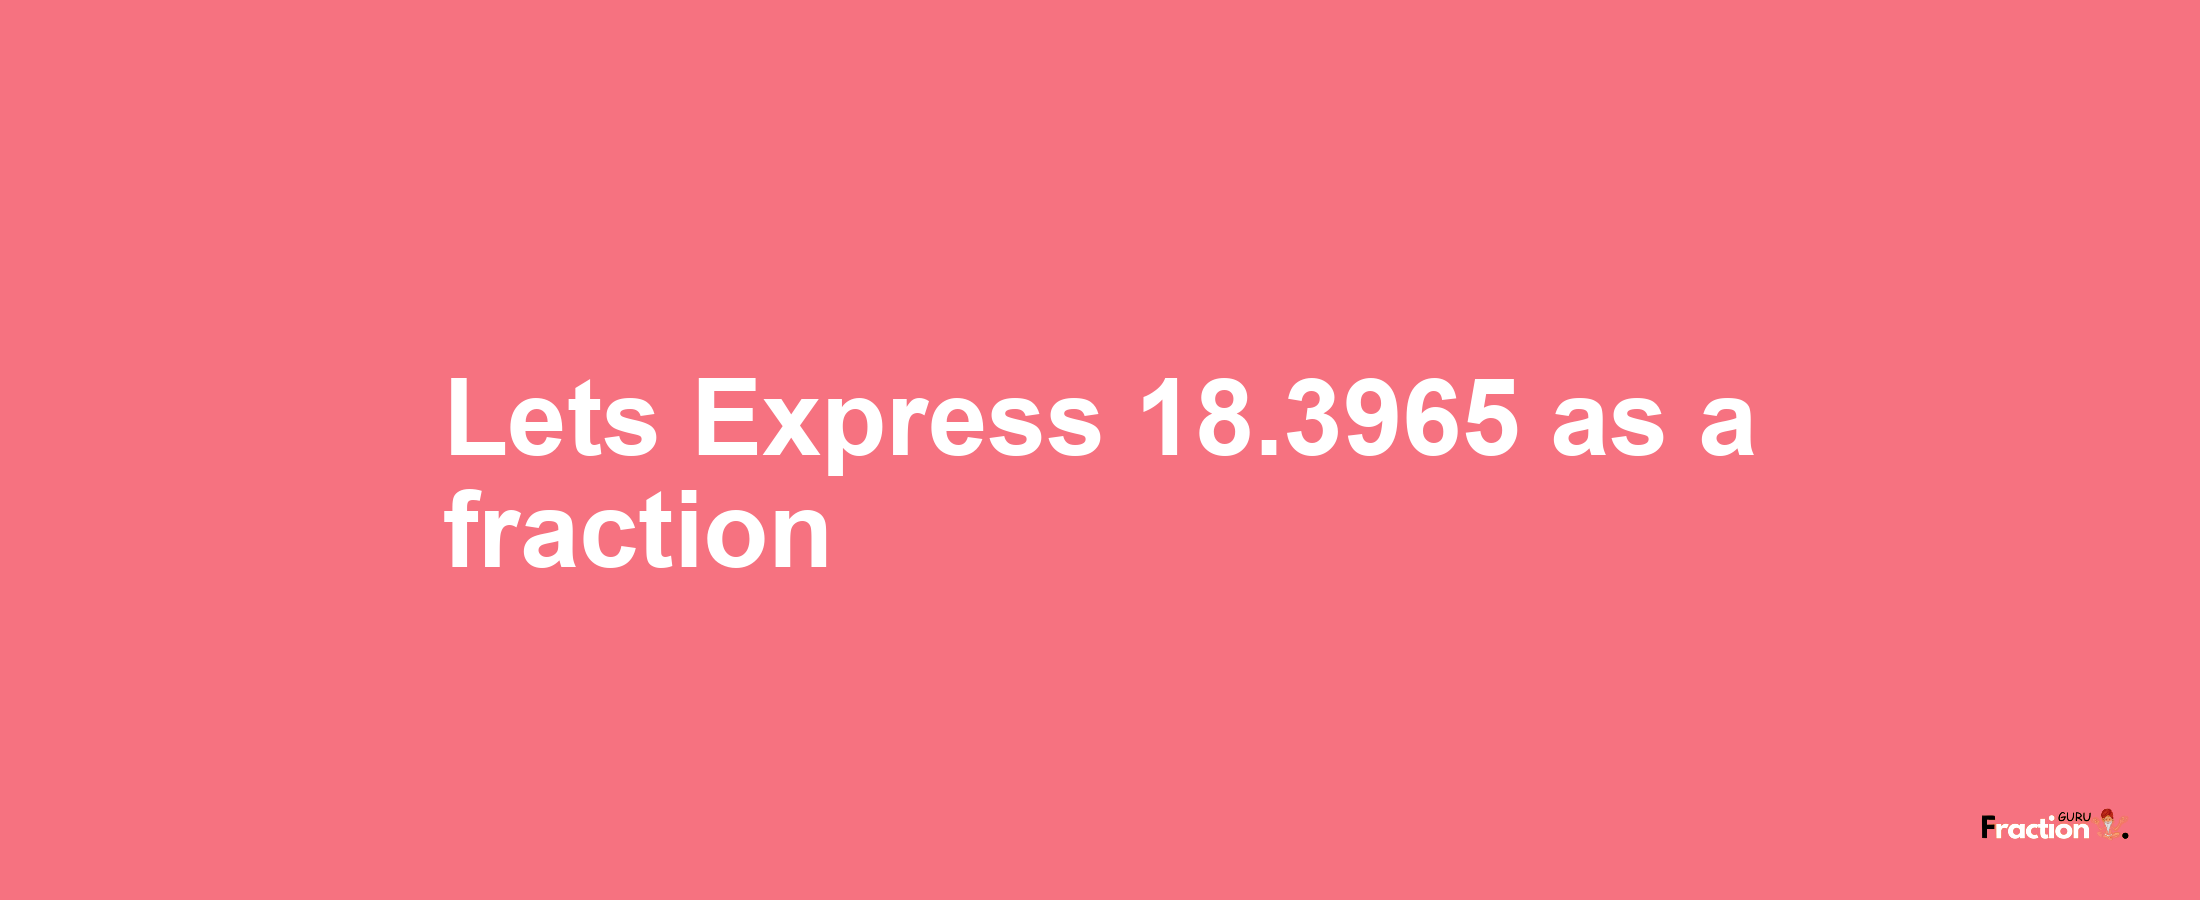 Lets Express 18.3965 as afraction